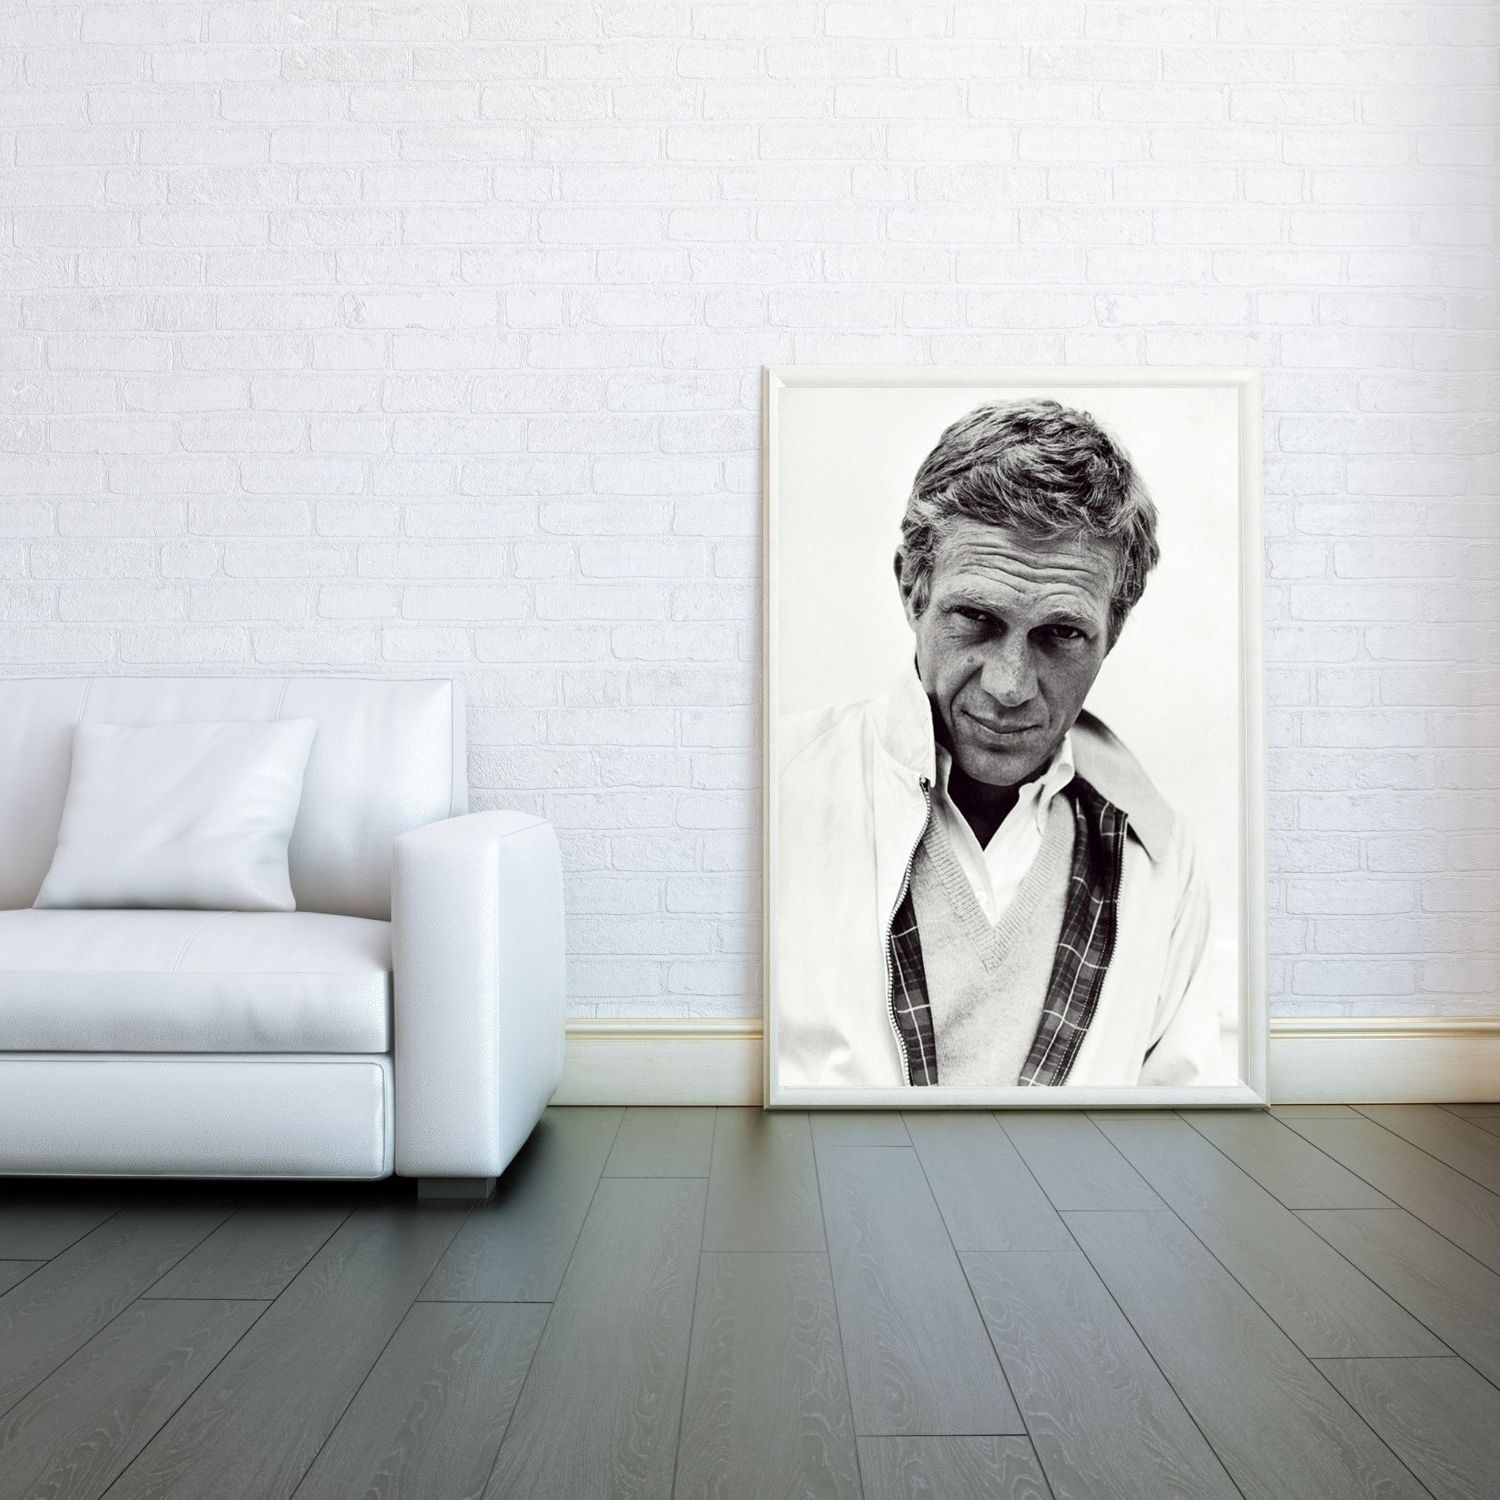 Steve Mcqueen Wall Art Regarding Well Known The King Of Cool Steve Mcqueen – Decorative Arts Prints & Posters (View 1 of 15)